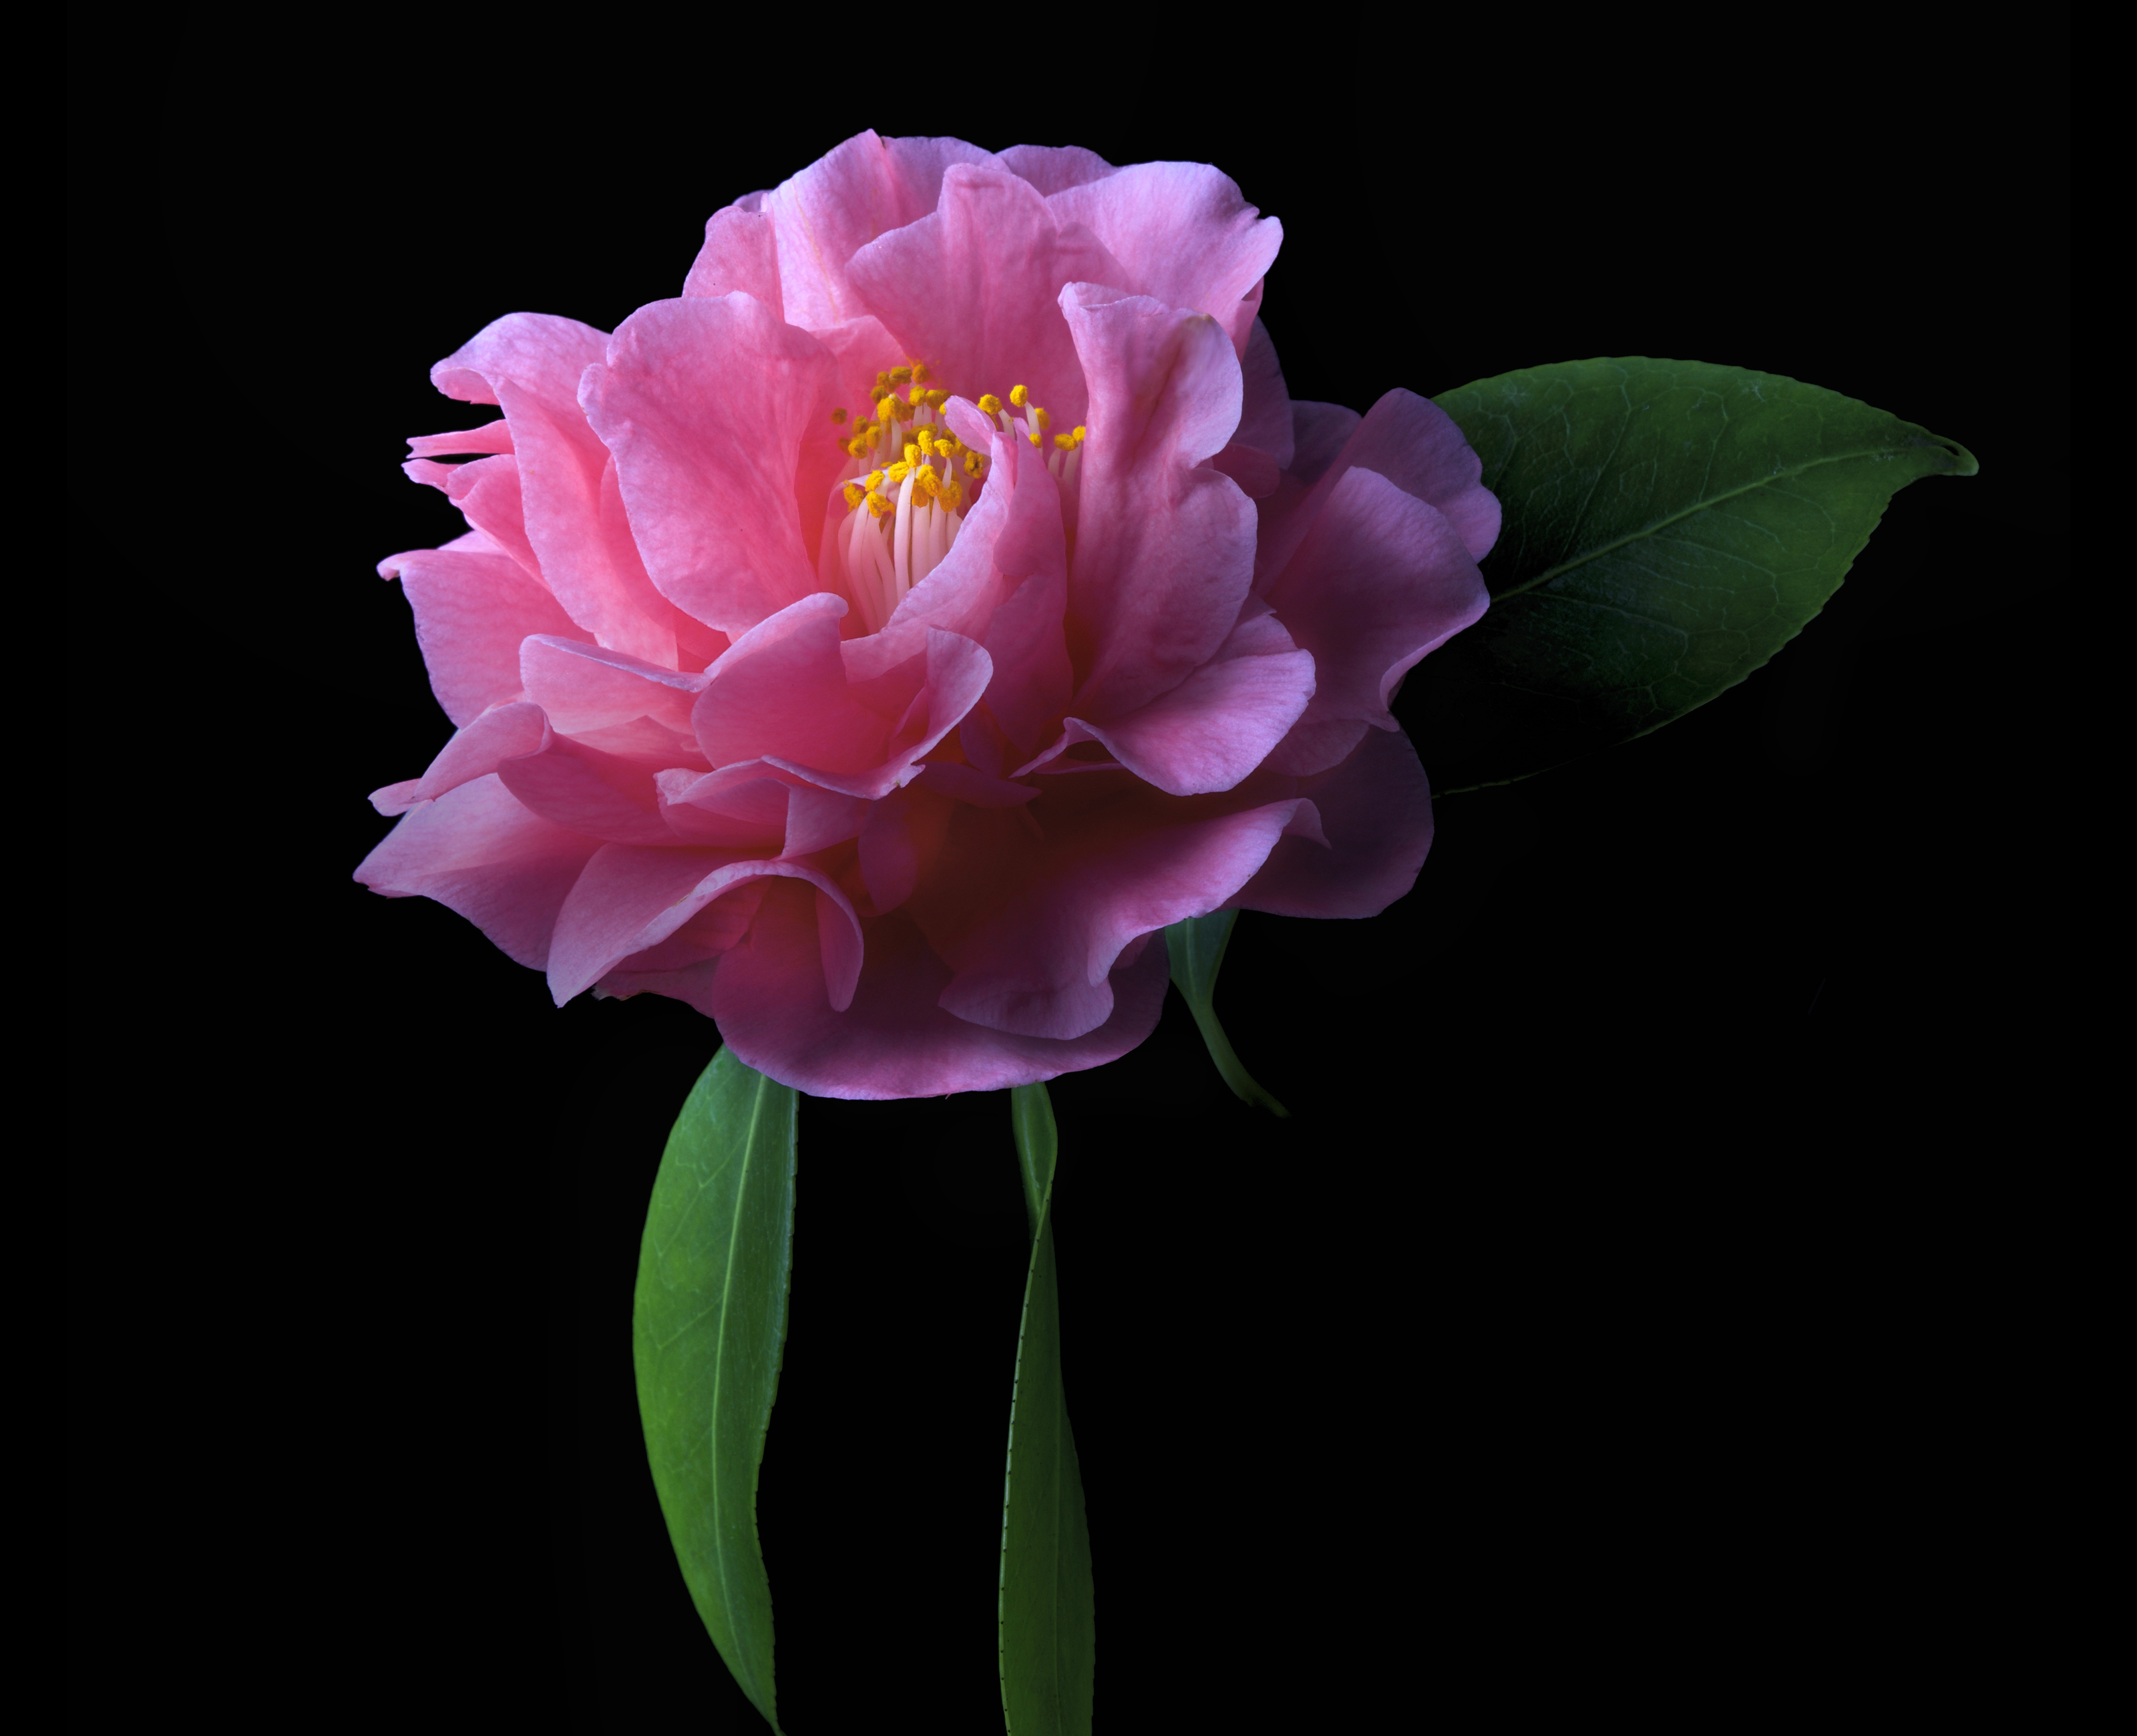 Camellia Close Up Earth Flower Pink Flower 3200x2600